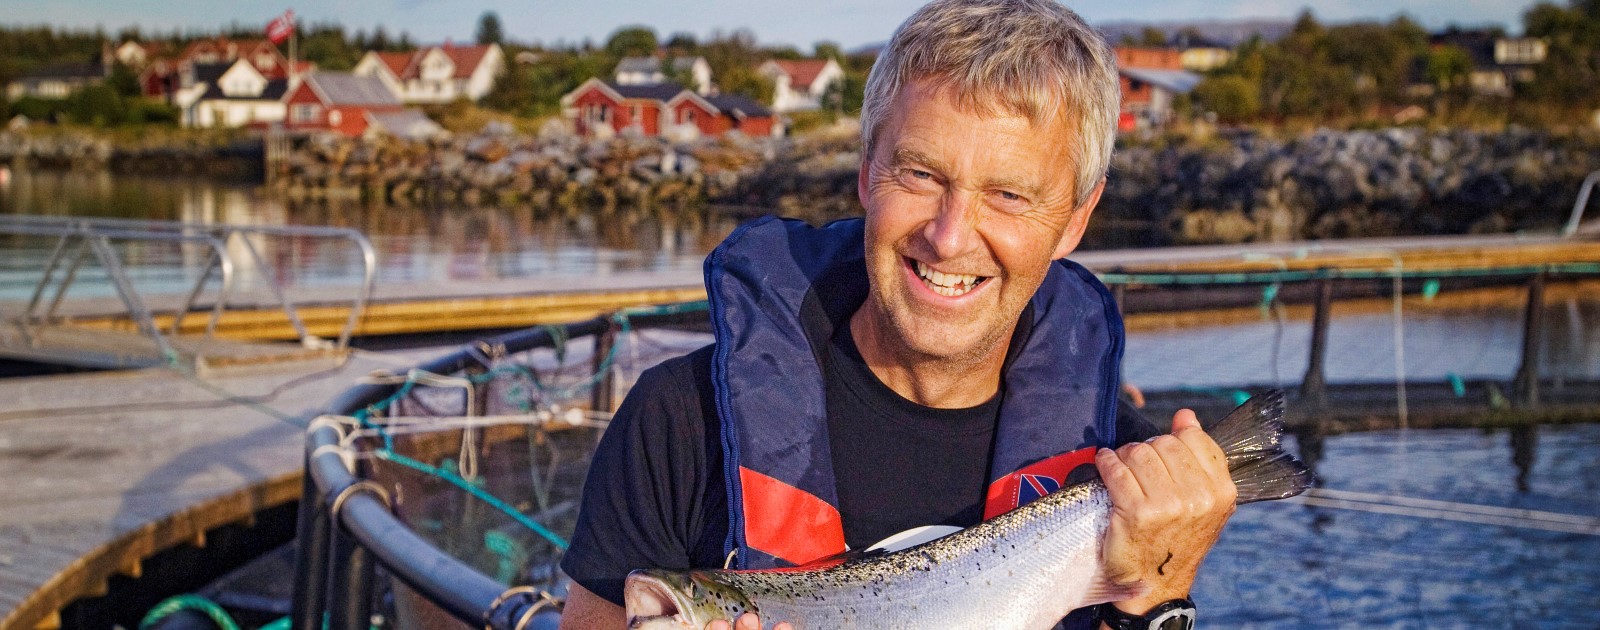 Salmon fishing in Norway - Books From Norway